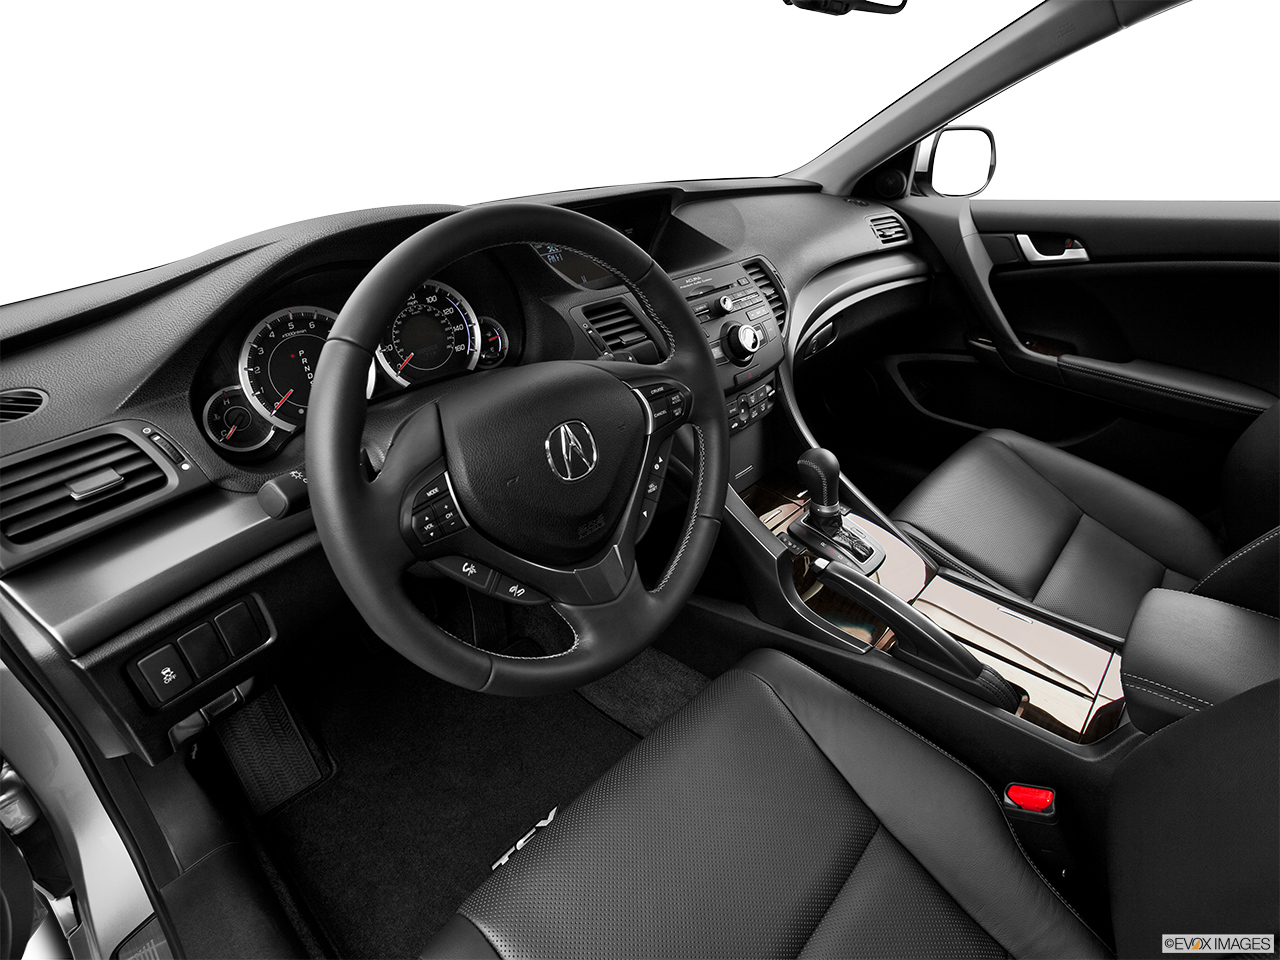 2013 Acura TSX 5-speed Automatic Interior Hero (driver's side). 